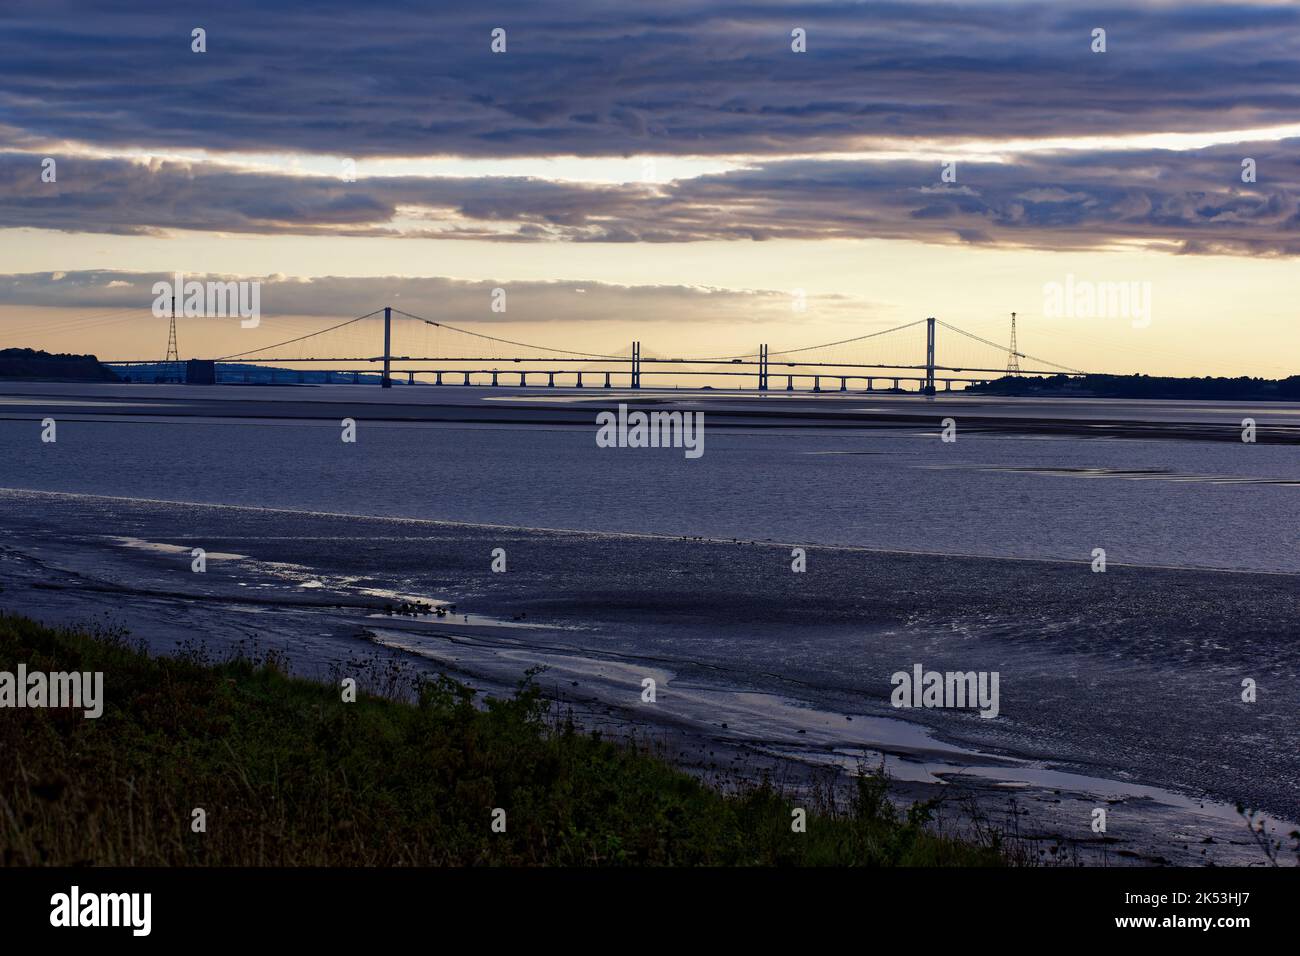 Two Severn Bridges at Sunset connecting South Gloucestershire to South Wales over the River Severn Estuary, UK Stock Photo